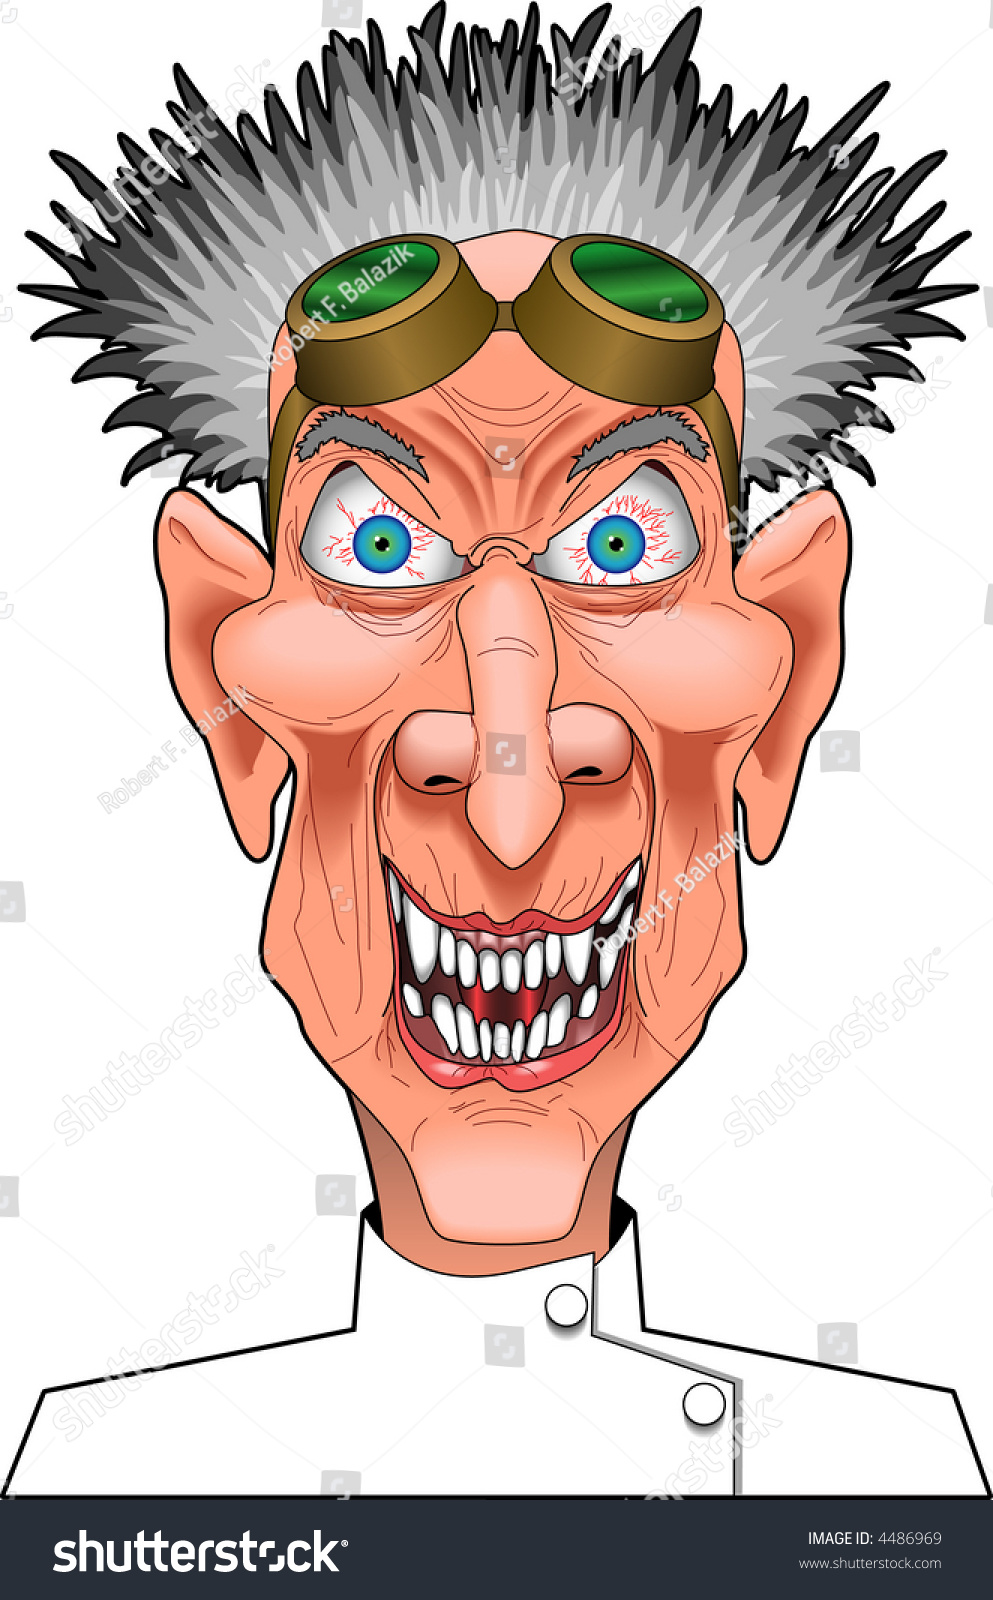 Cartoon Vector Graphic Depicting A Mad Scientist - 4486969 : Shutterstock